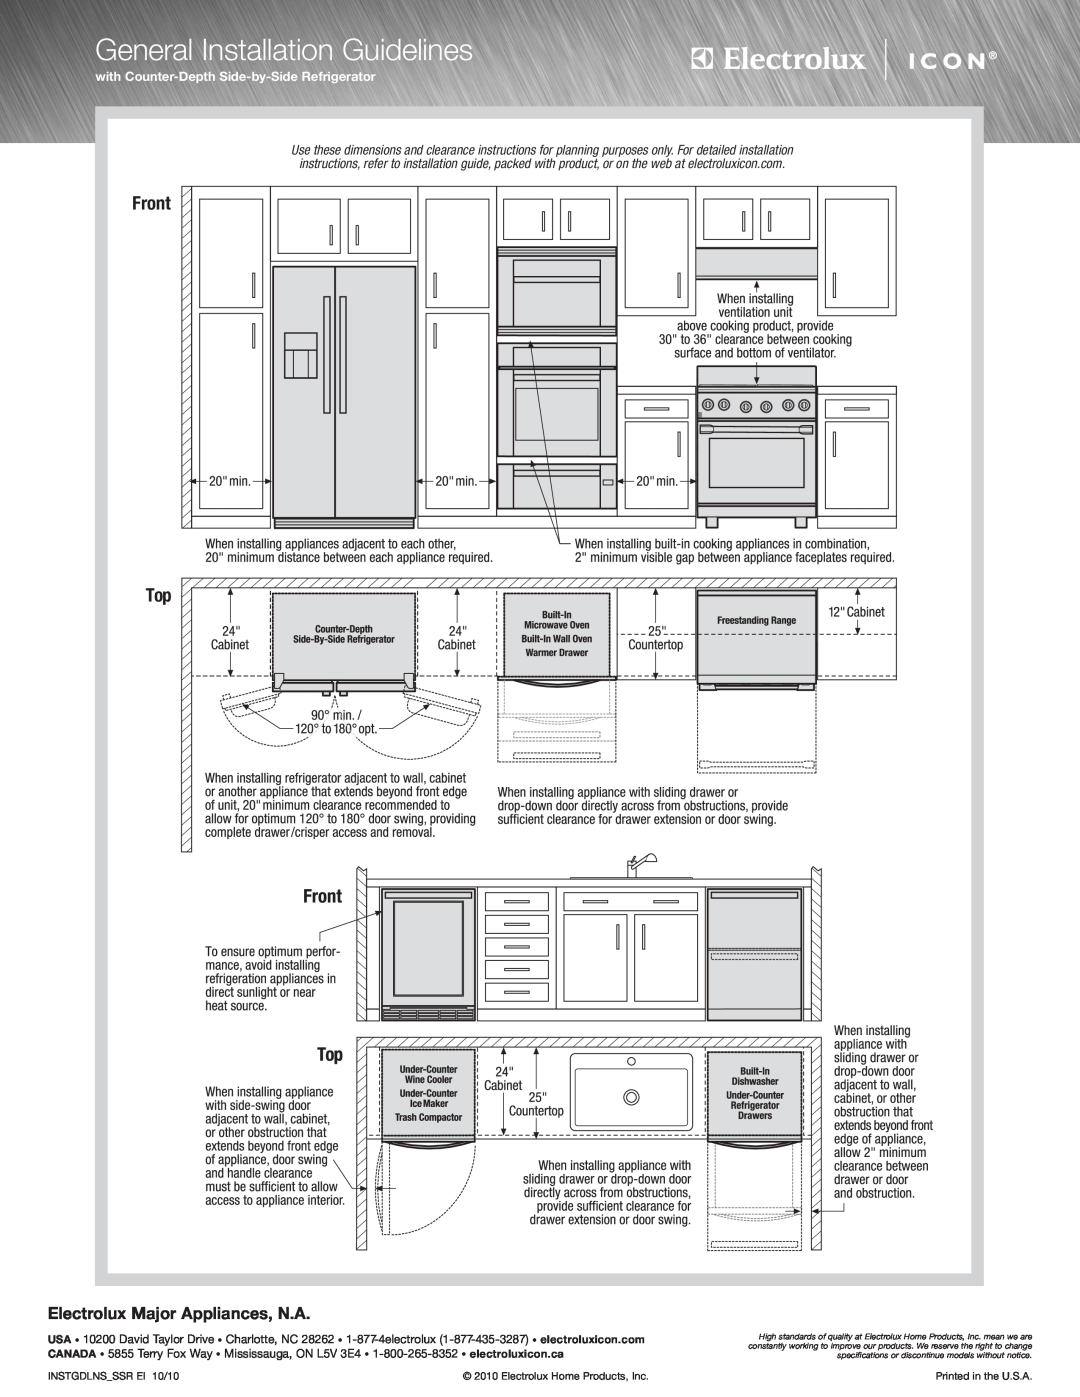 Electrolux E30EW85GPS specifications General Installation Guidelines, Electrolux Major Appliances, N.A, Front 